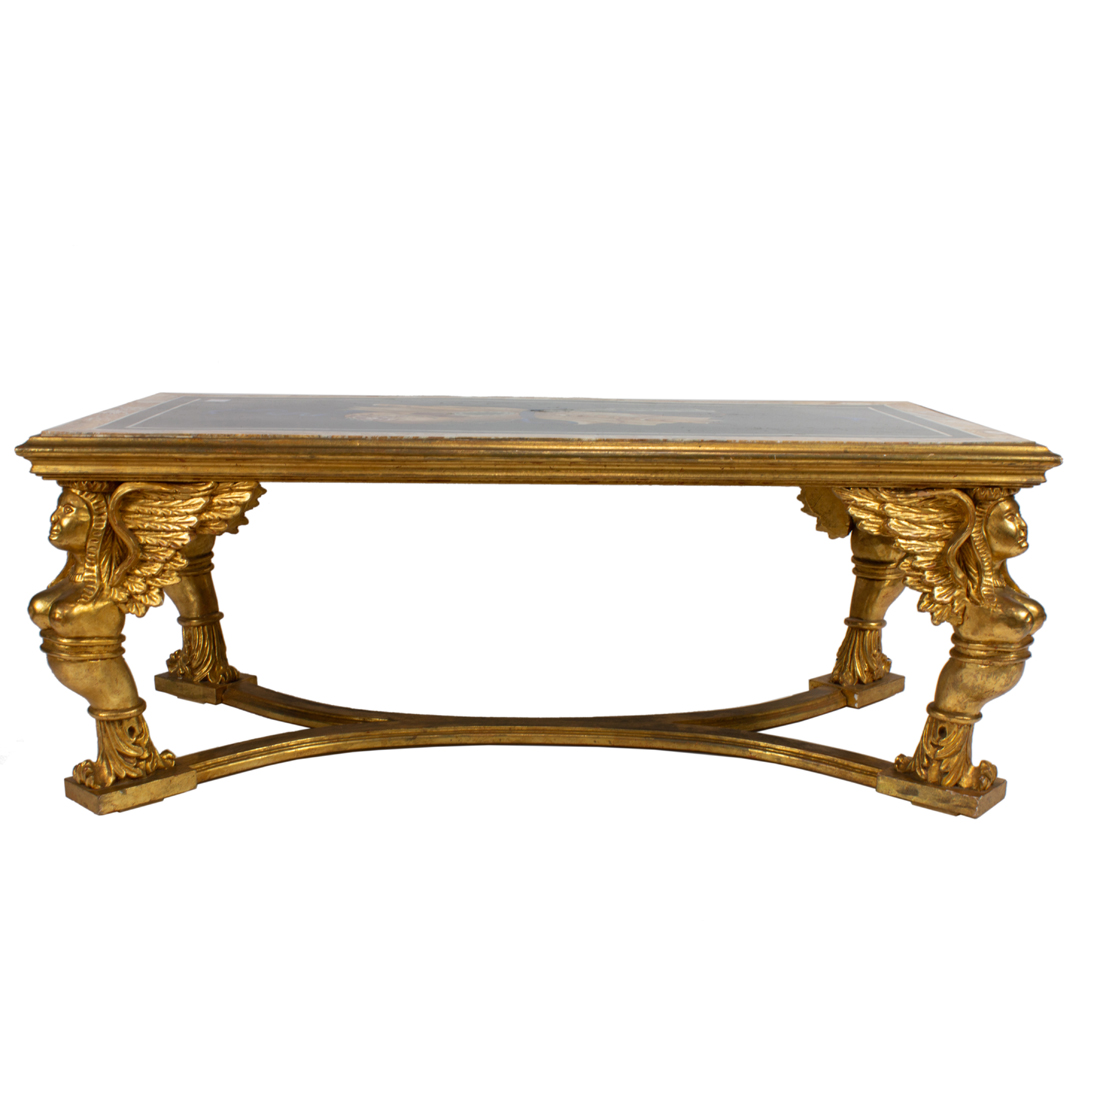 AN ITALIAN GILTWOOD CARVED AND